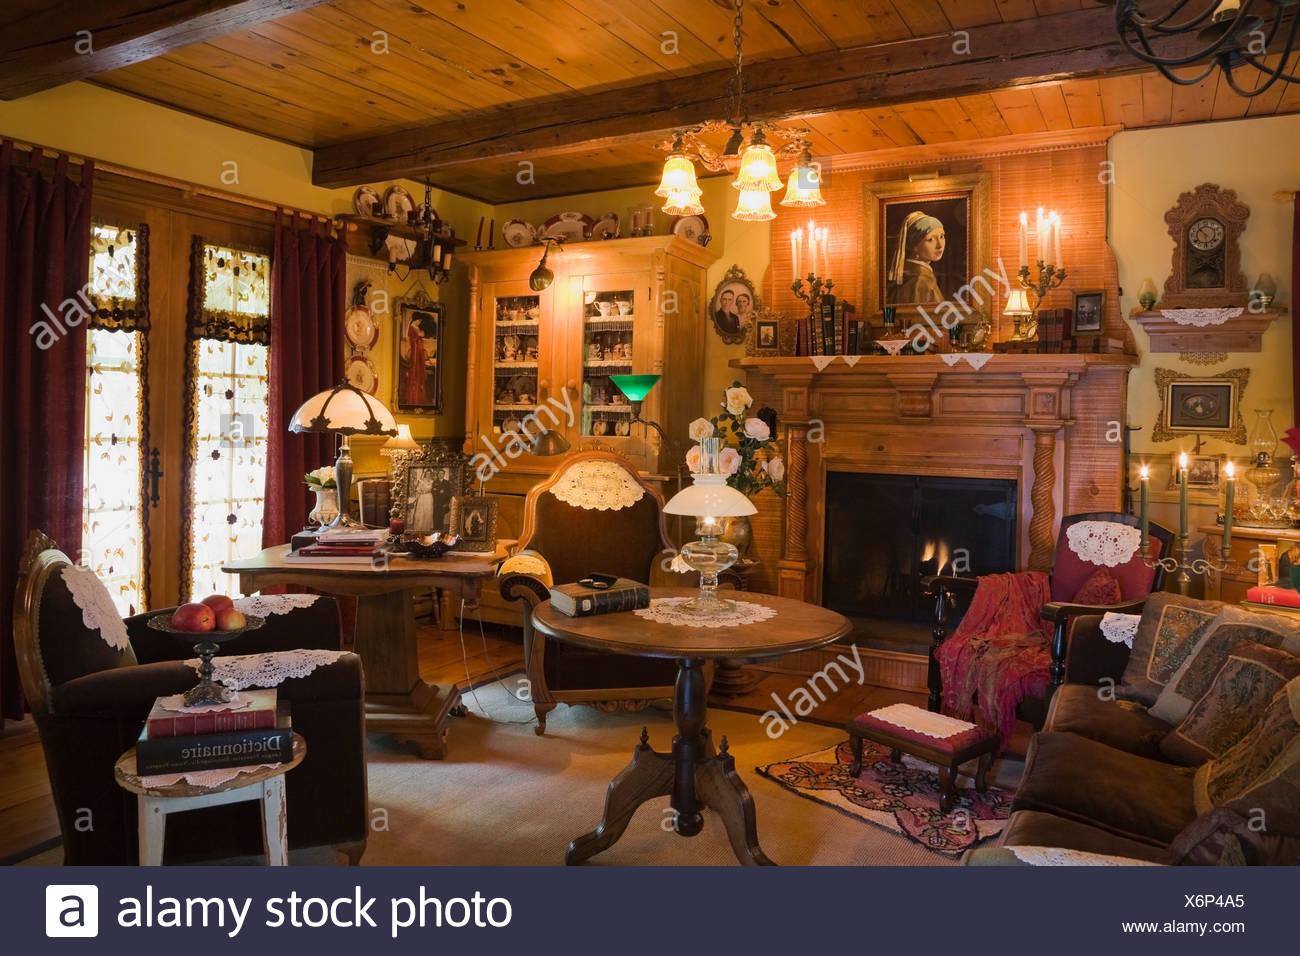 Living Room Of 1970s Reconstruction Of Log Home Filled With